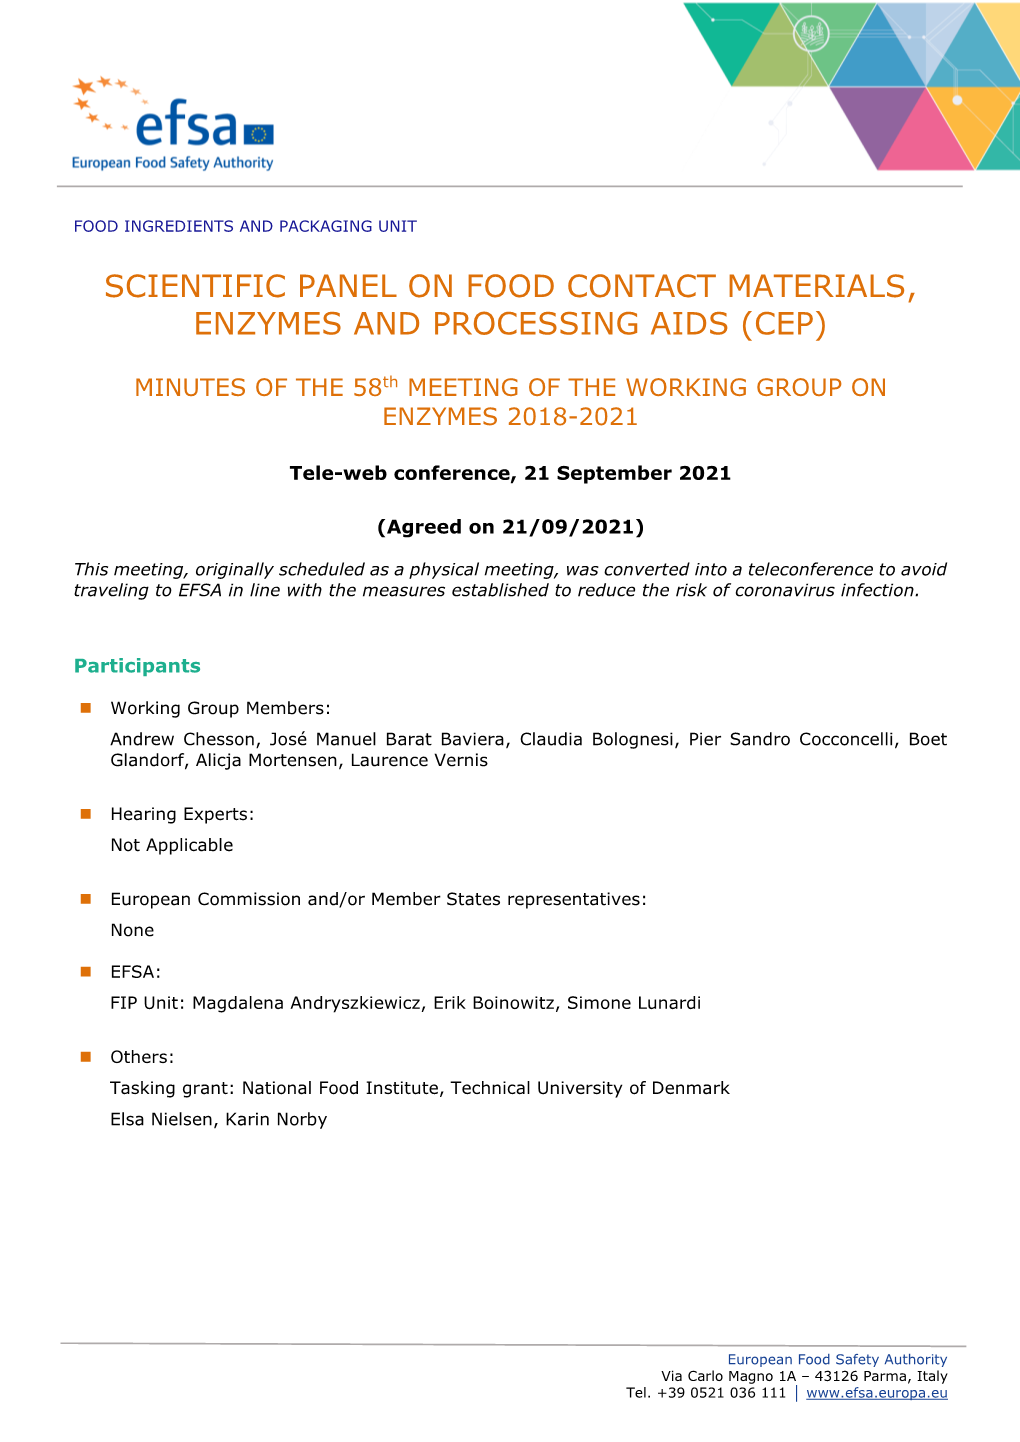 Scientific Panel on Food Contact Materials, Enzymes and Processing Aids (Cep)